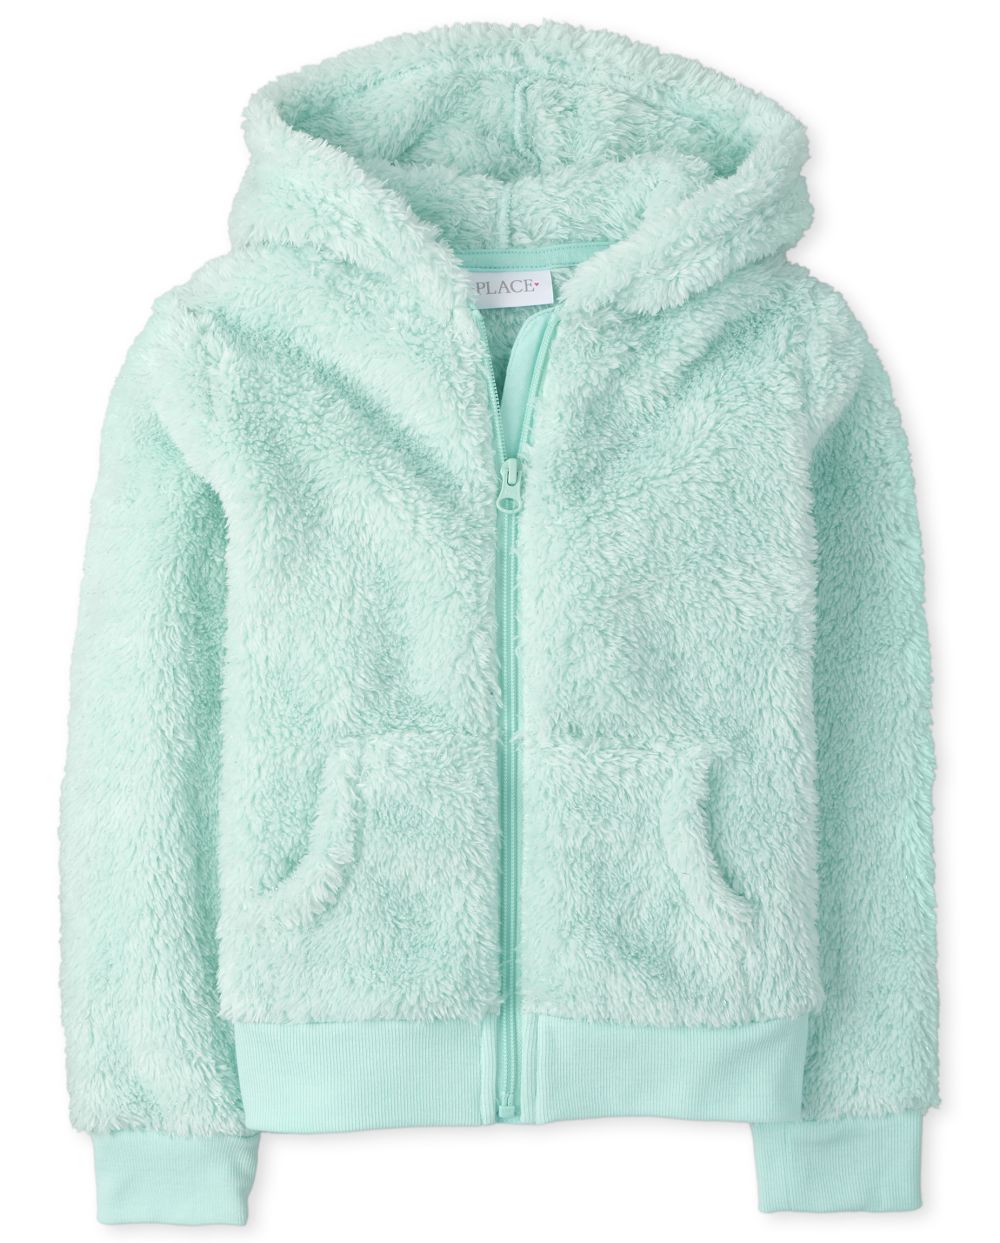 

Girls Sparkle Faux Fur Zip Up Hoodie - Green - The Children's Place